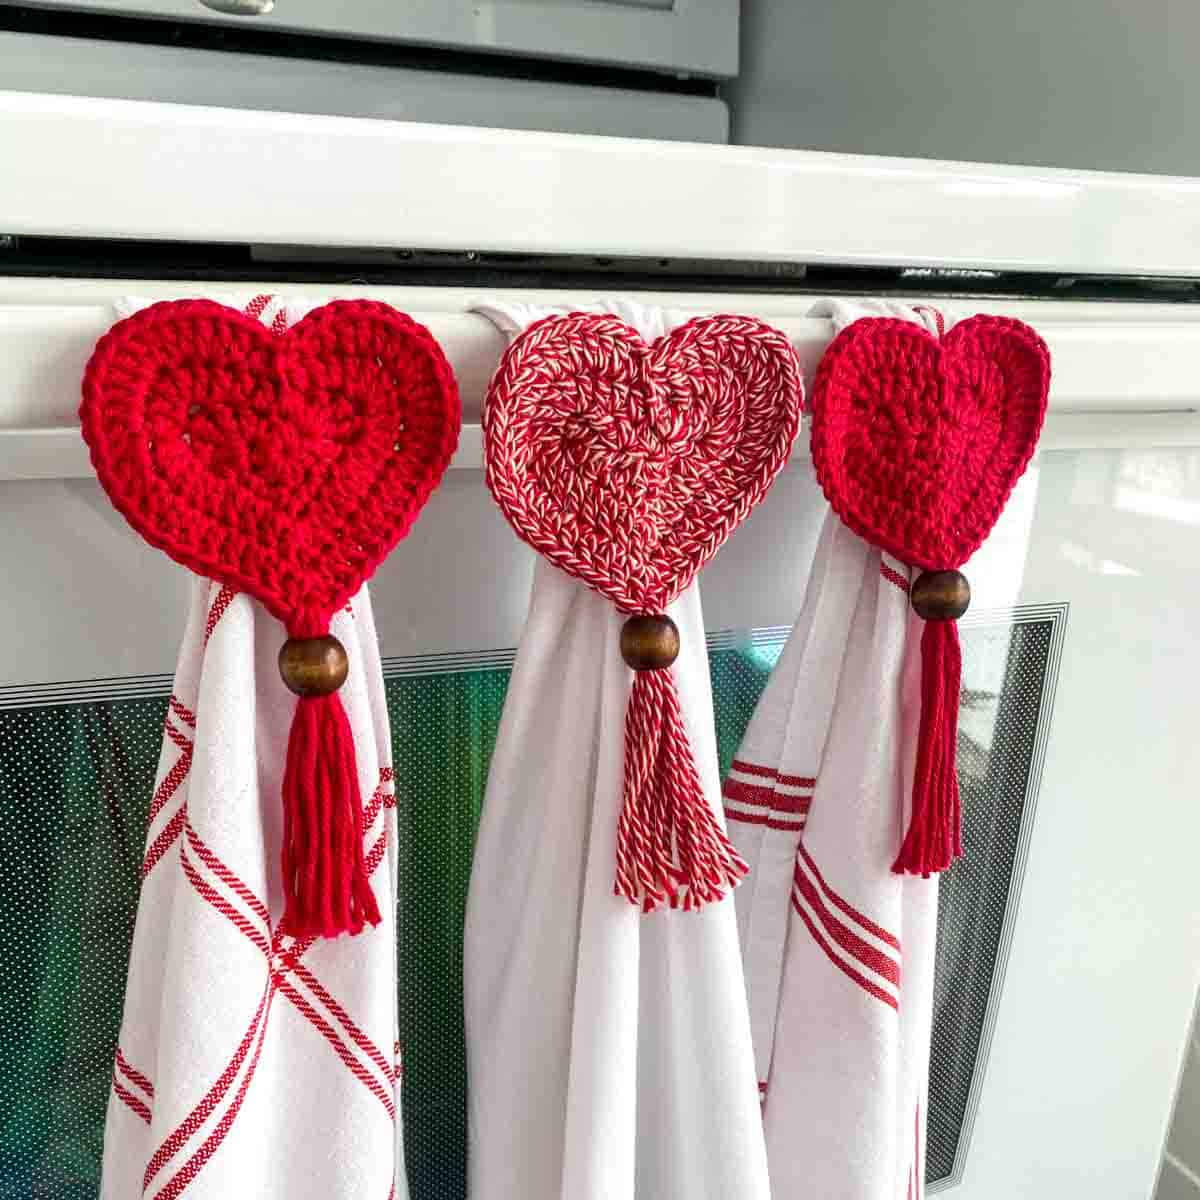 3 heart crochet tea towel toppers hanging 3 red and white towels on a oven handle